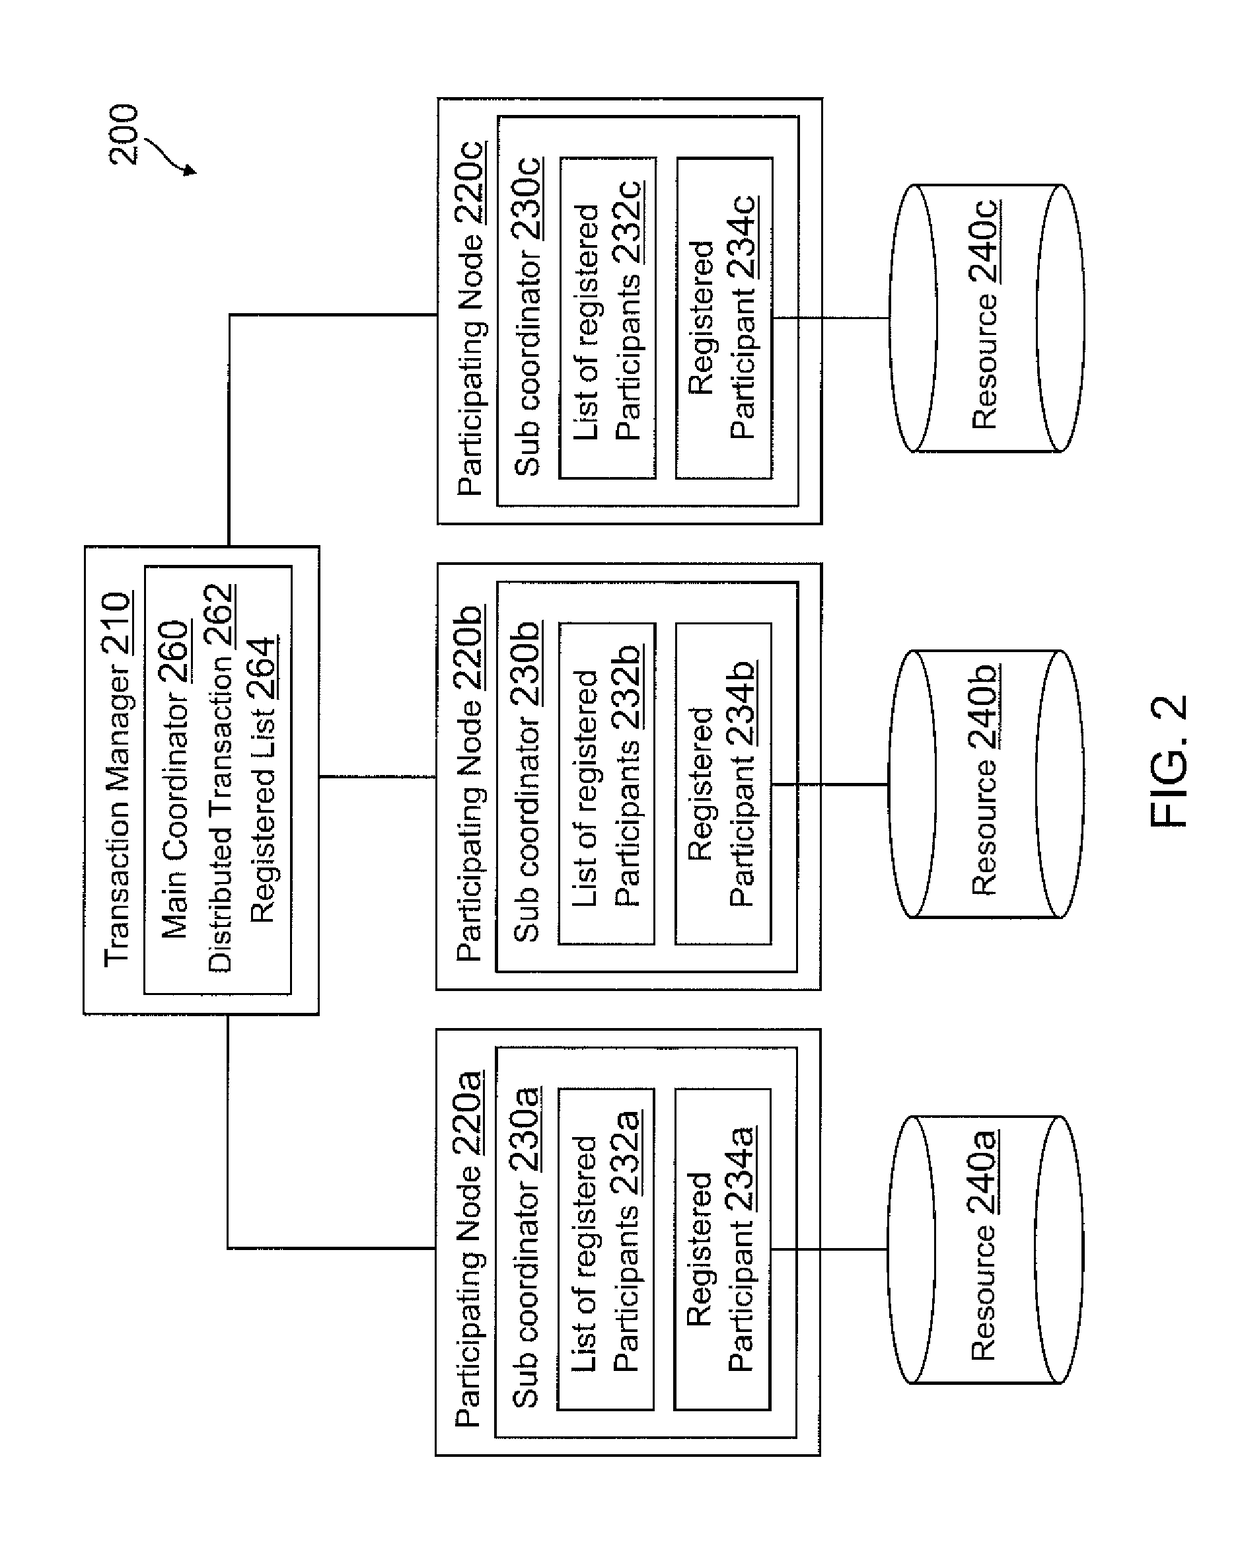 Systems and methods for communicating information of participants registered with a sub-coordinator during distributed transaction processing